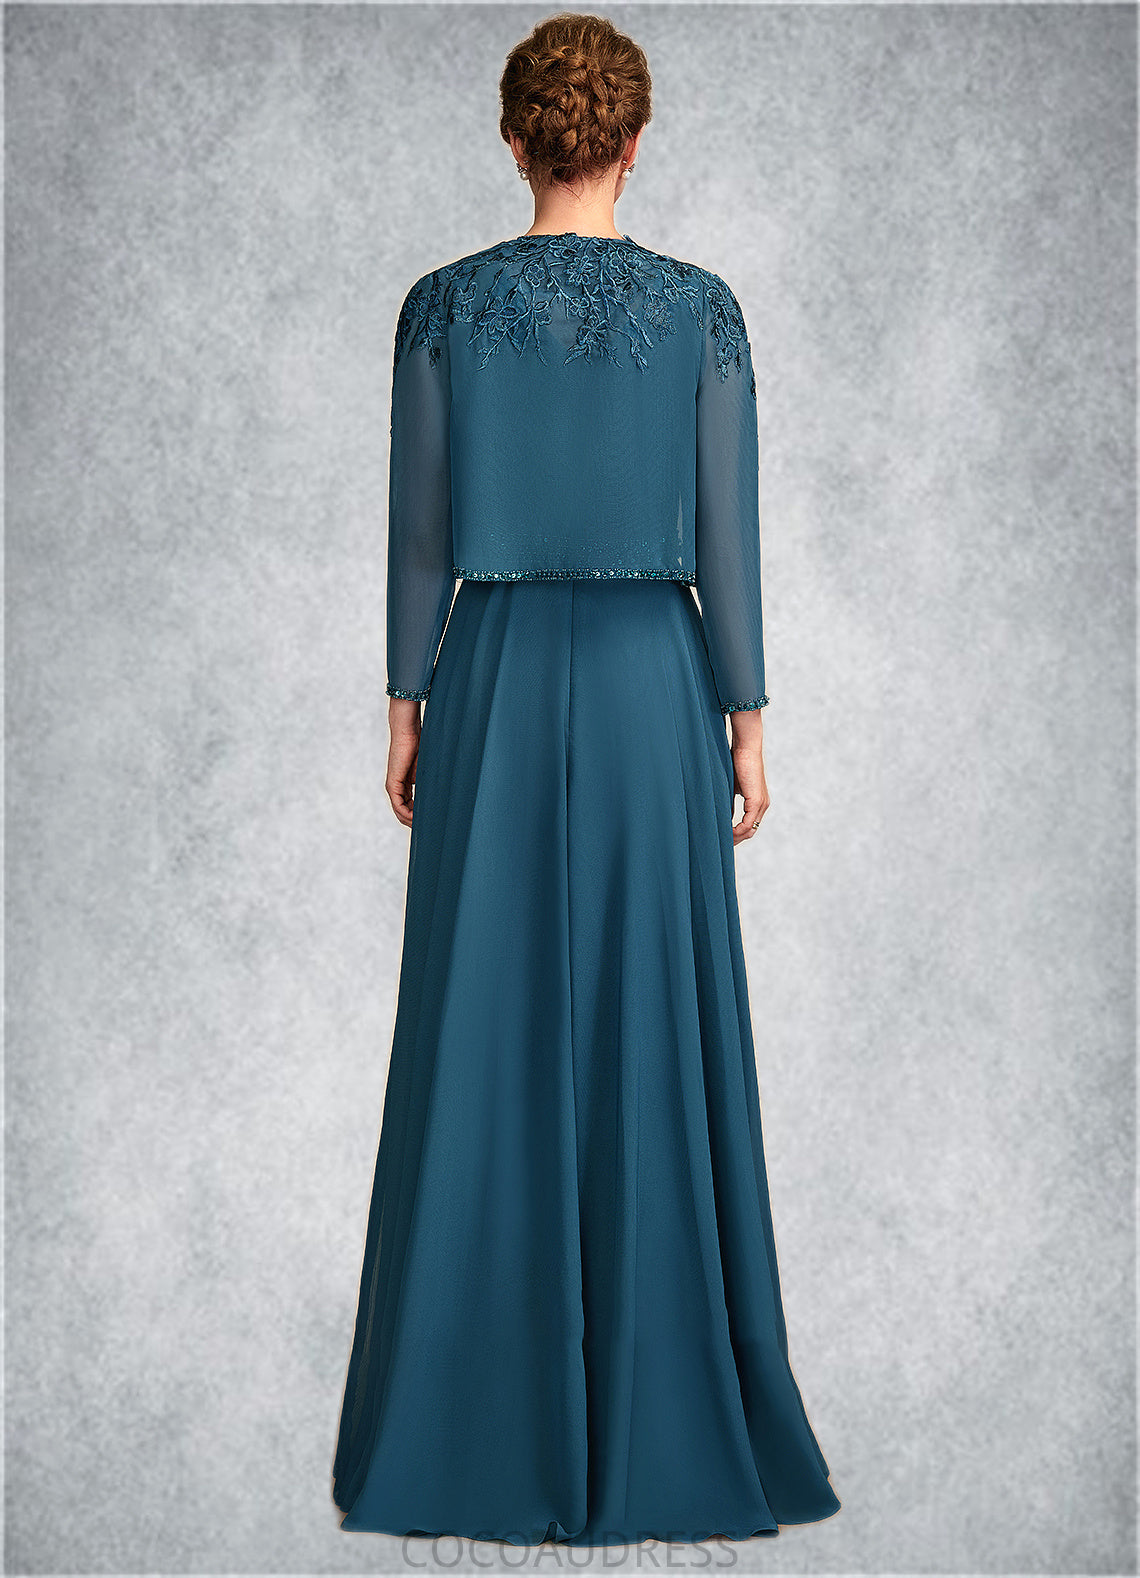 Imani A-Line V-neck Floor-Length Chiffon Lace Mother of the Bride Dress With Beading Sequins 126P0015004